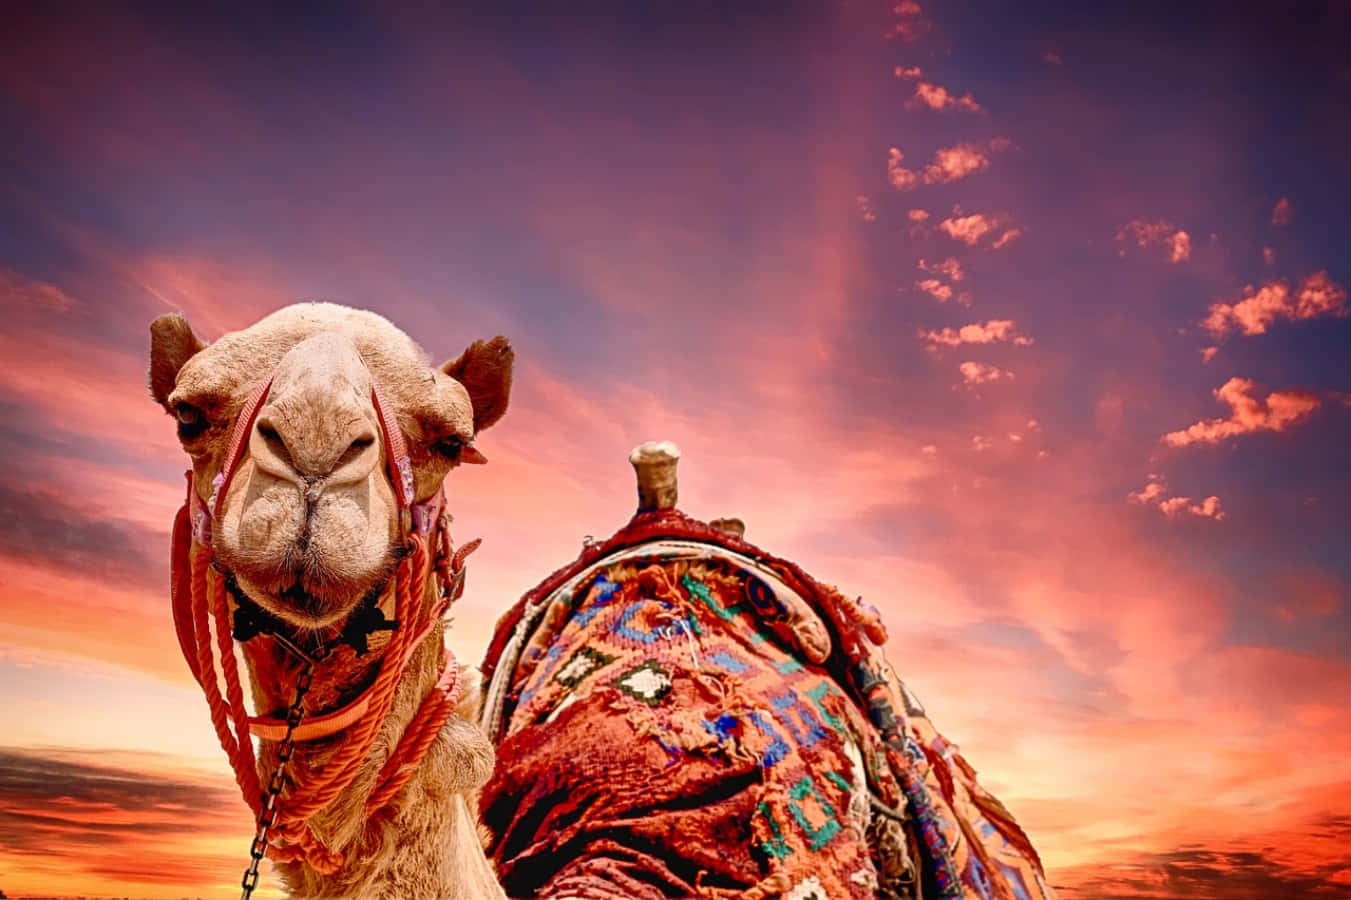 Explore Majestic Camel Watching the Sunset